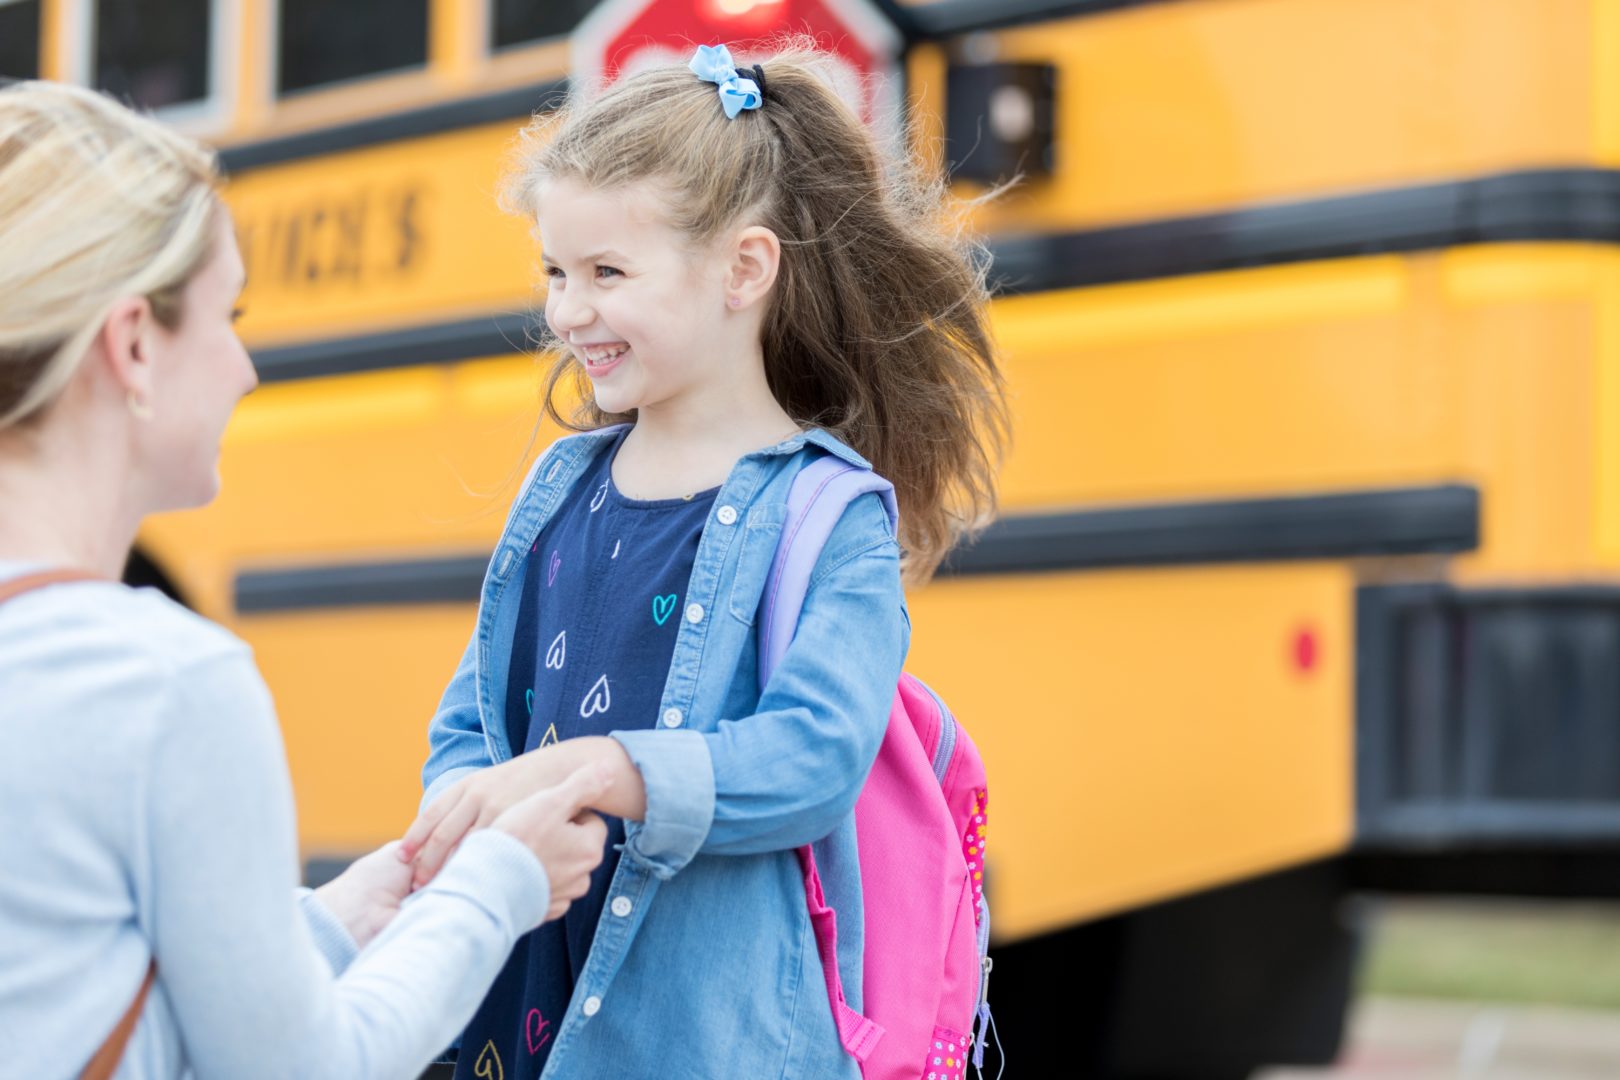 Expert Advice: 5 Back to School Tips from Sue Atkins